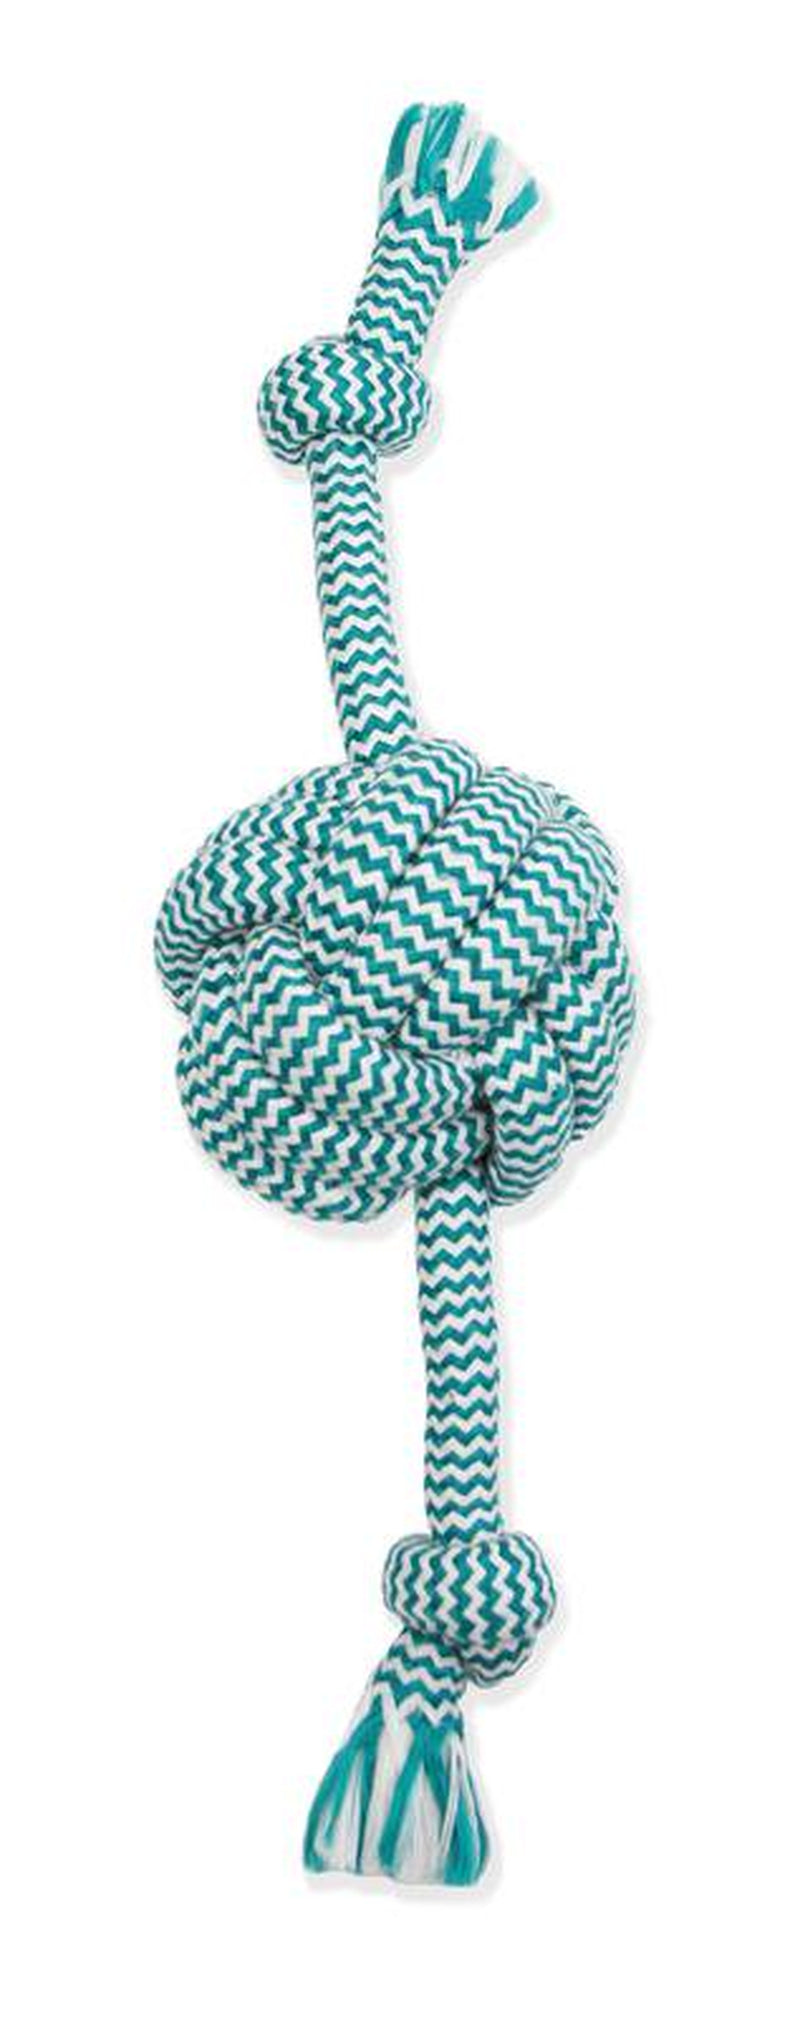 Mammoth Small 13" Extra Fresh Monkey Fist Ball Dog Toy with Rope Ends Animals & Pet Supplies > Pet Supplies > Dog Supplies > Dog Toys Mammoth Pet Products   